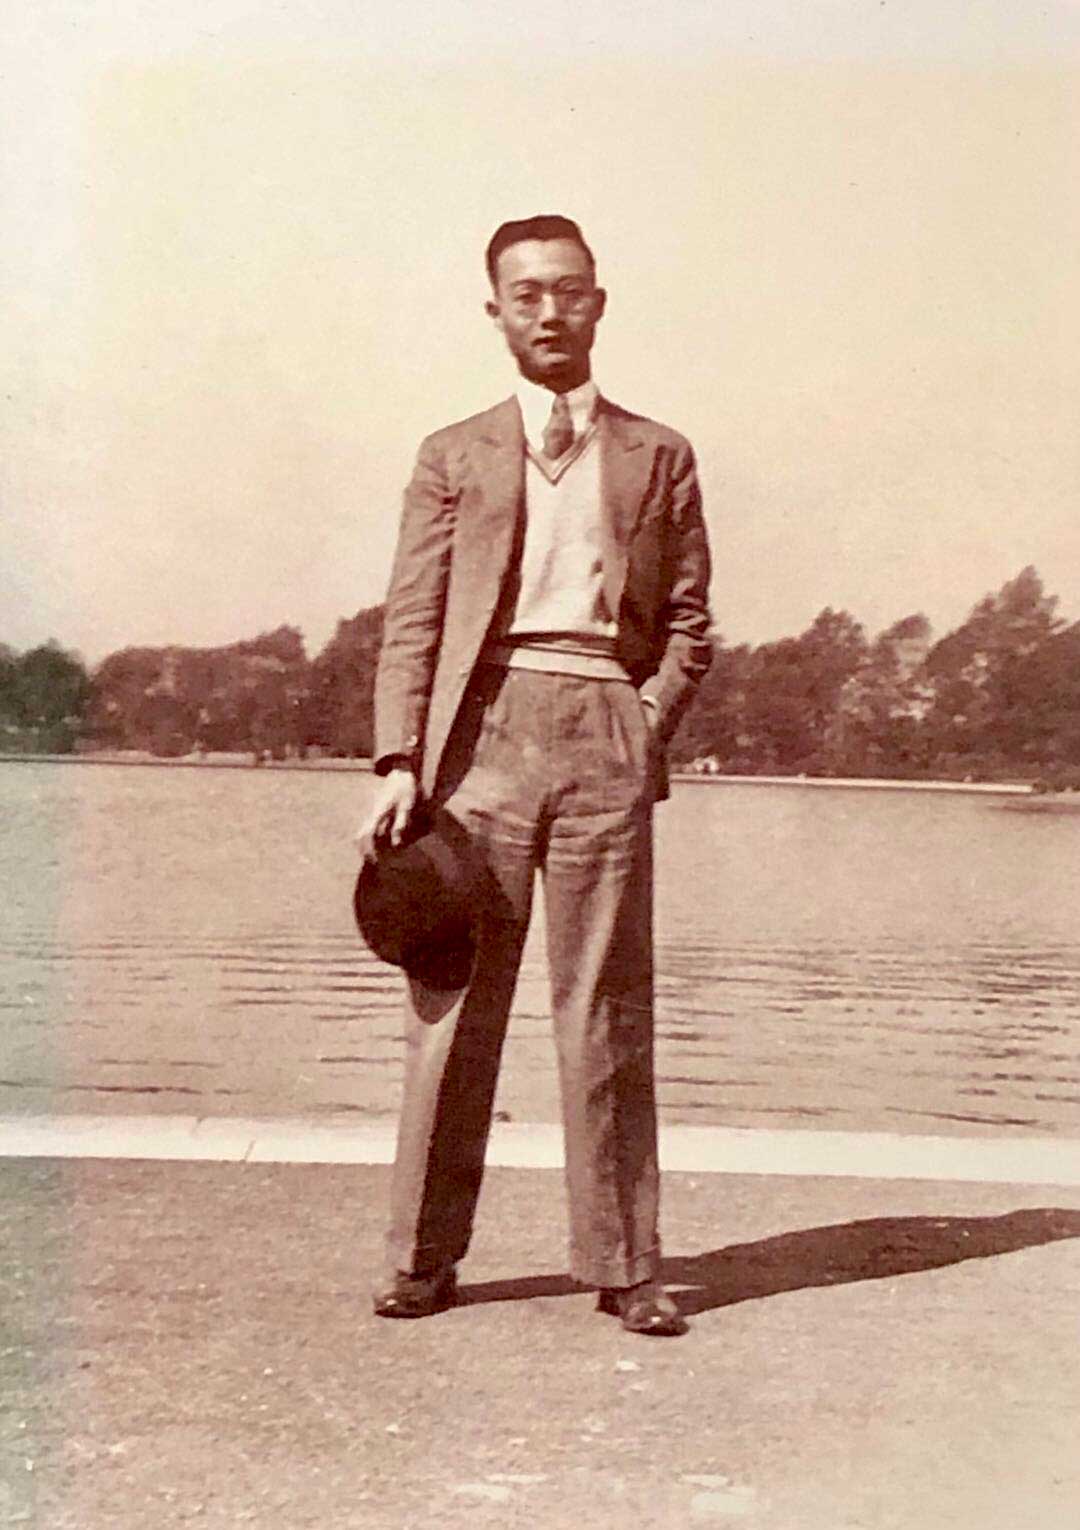 Chang You-ling wearing a suit holding a hat and standing in front of water with trees in the background